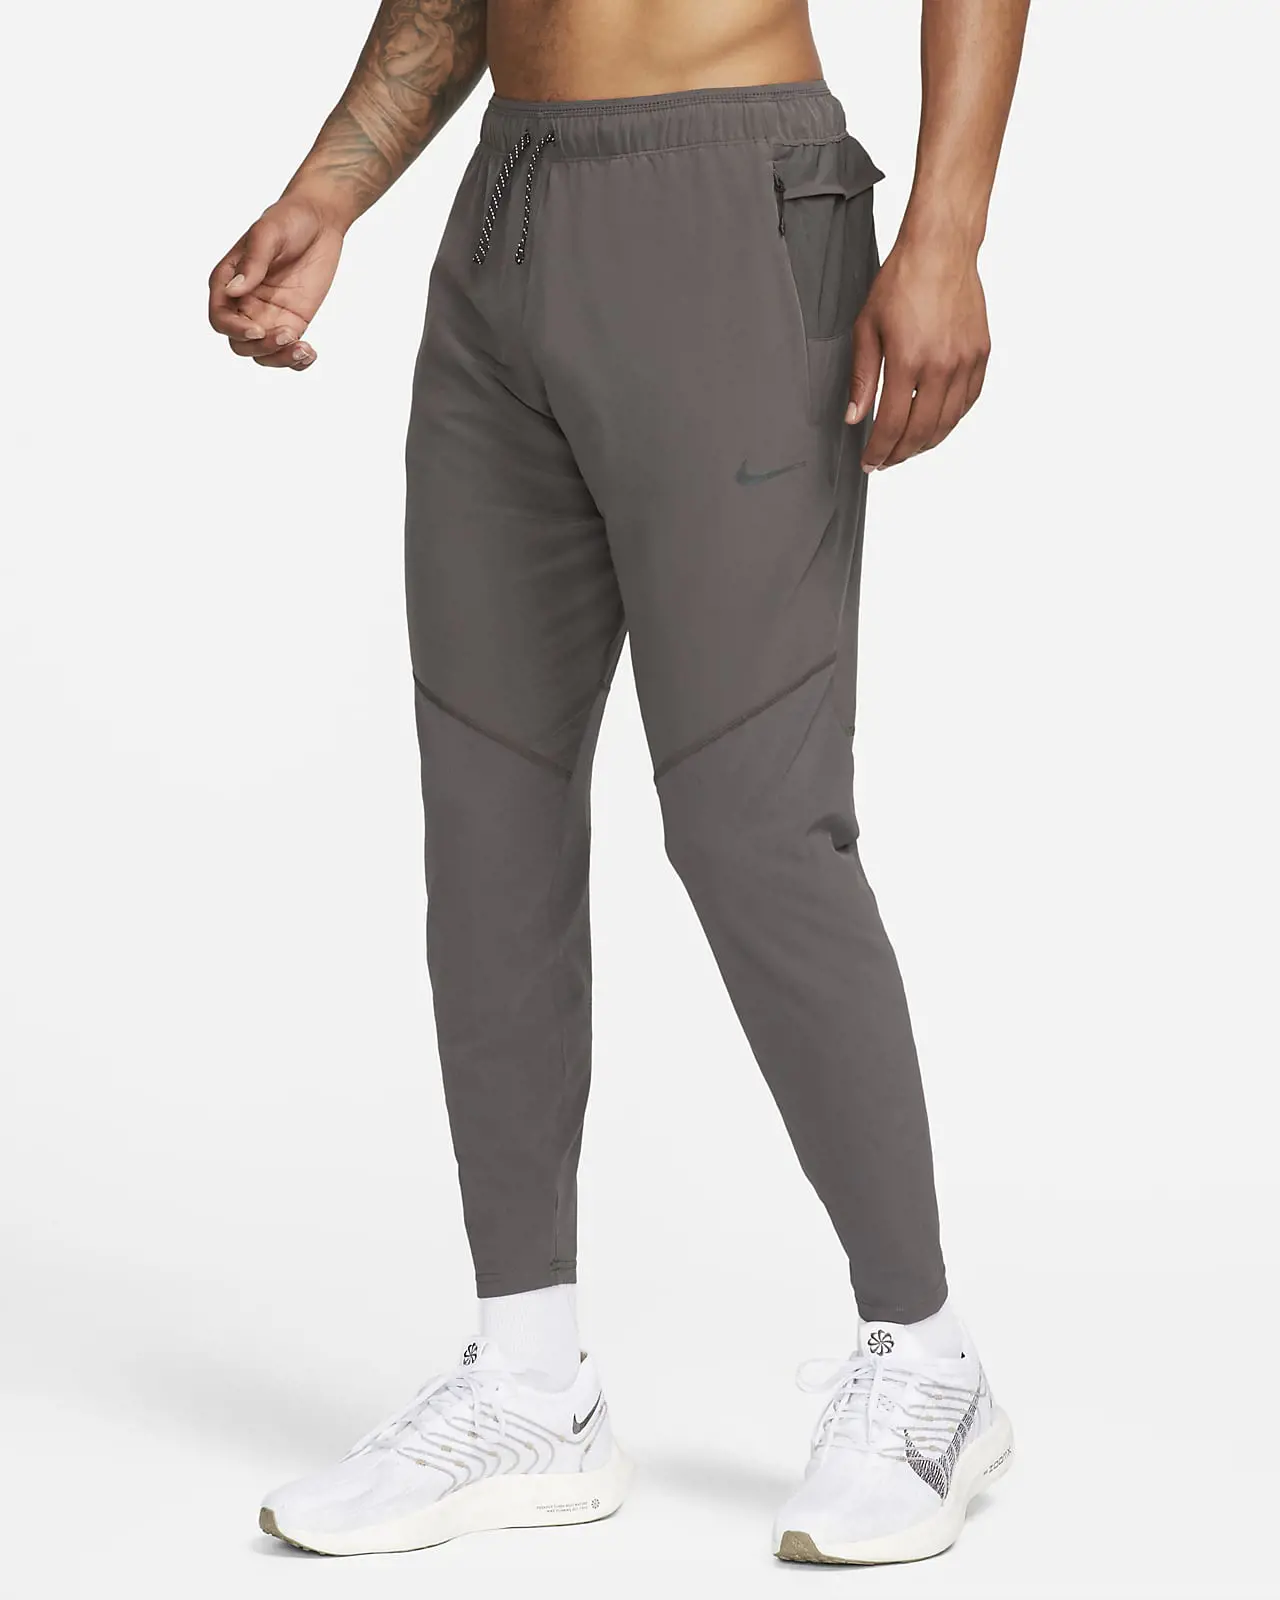 Finding The Style Number On Nike Pants: A Simple Guide | ShunVogue